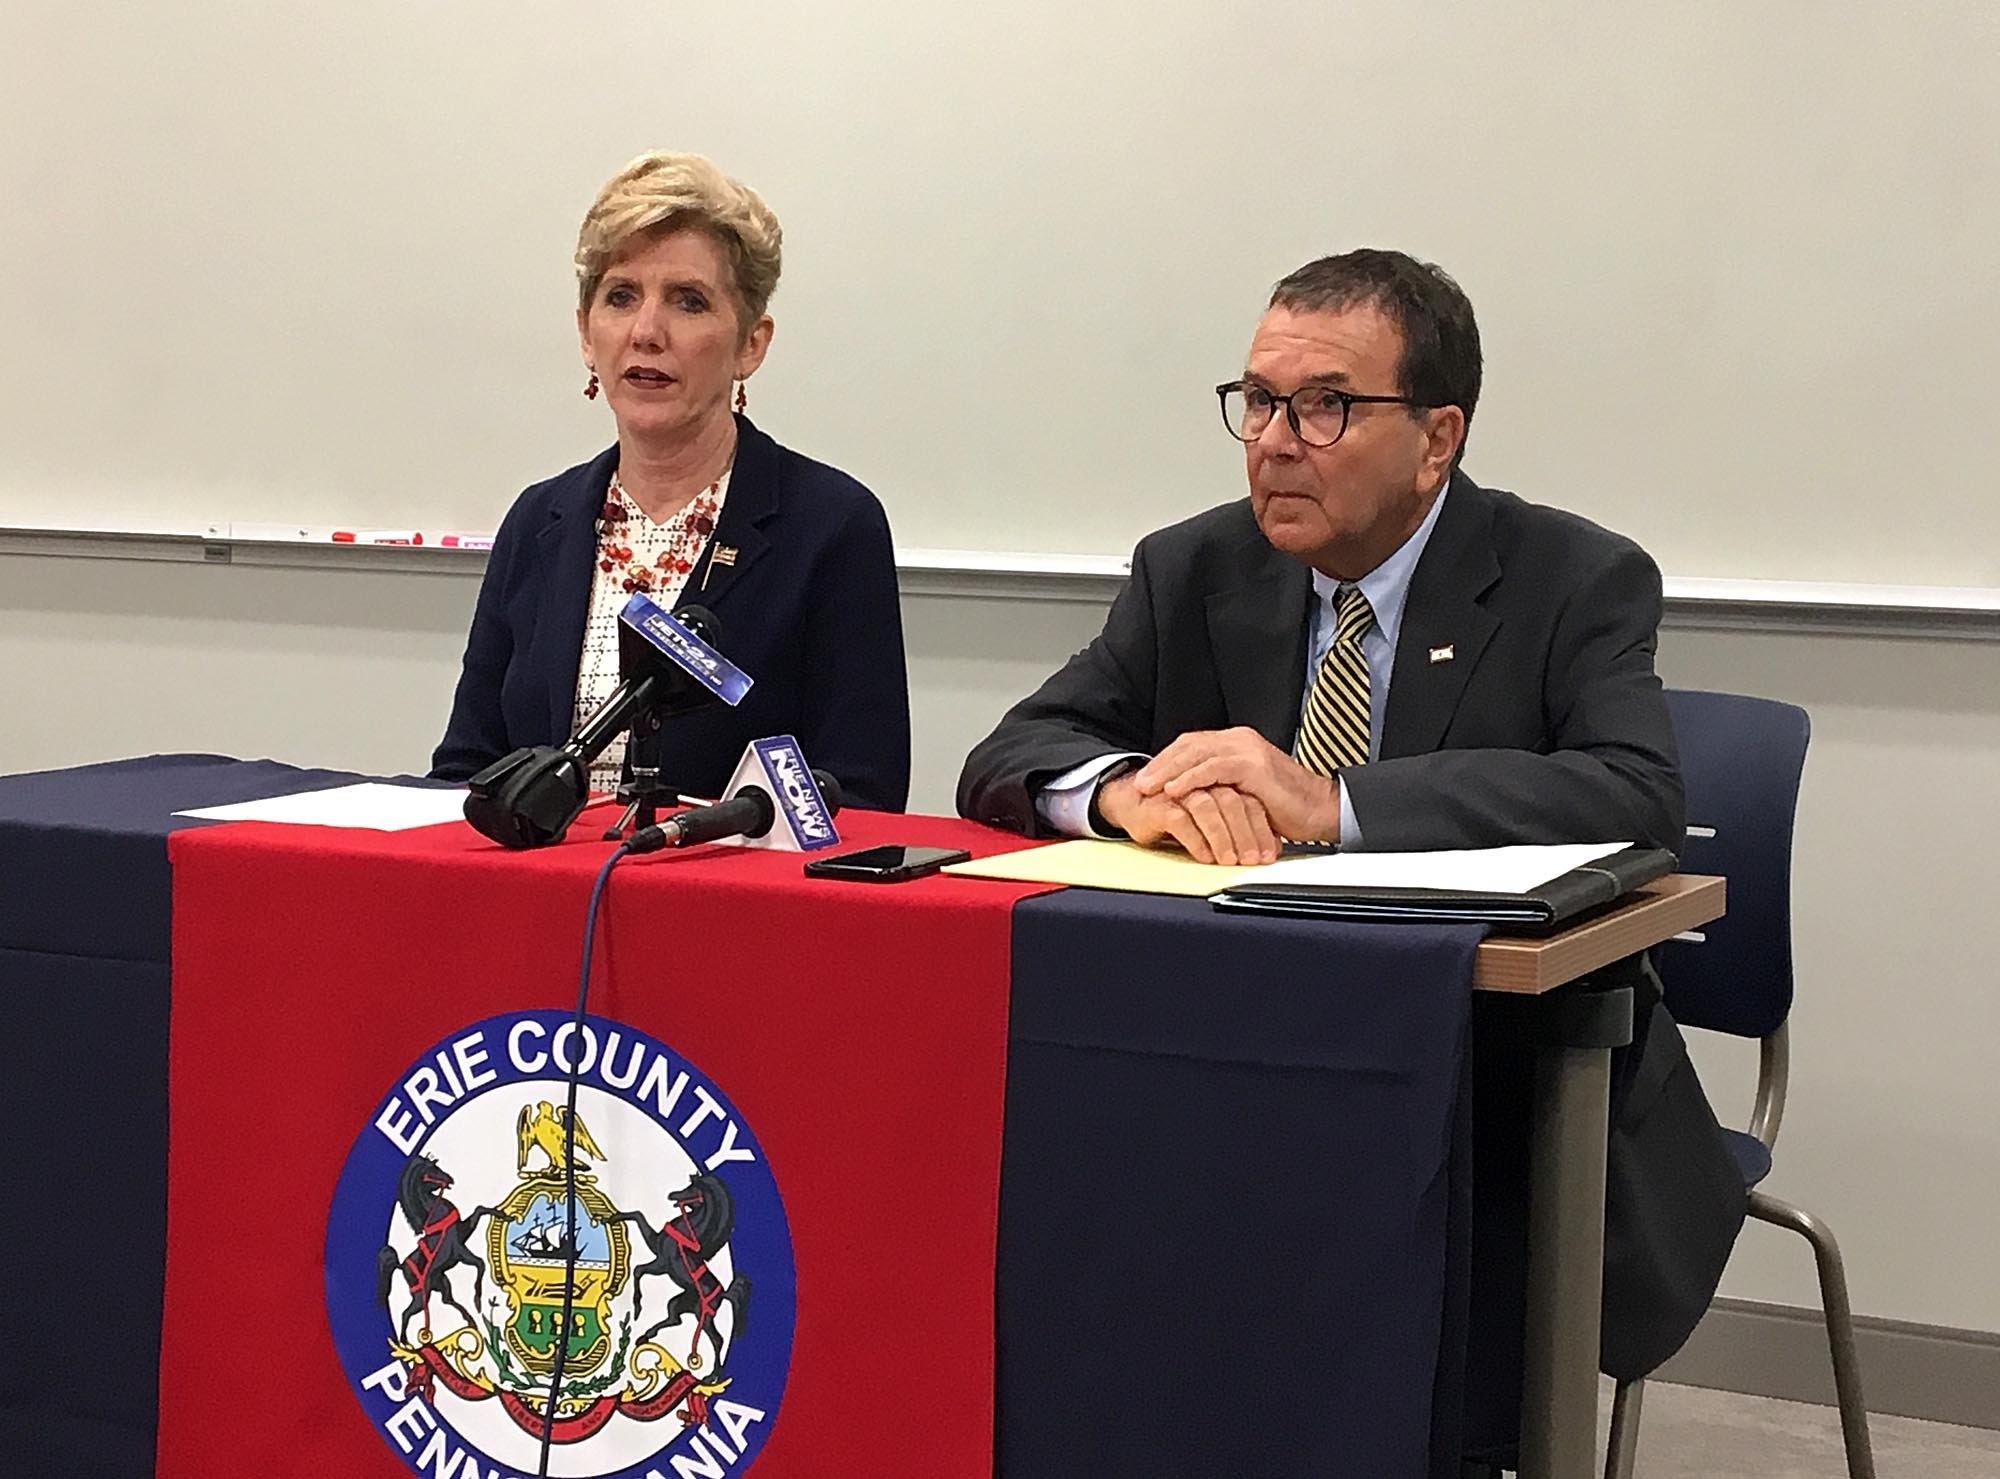  Erie County Executive Kathy Dahlkemper and Erie County Solicitor Richard Perhacs spoke at a June 14 news conference on the Felix Manus case. [MADELEINE O’NEILL/ERIE TIMES-NEWS] 